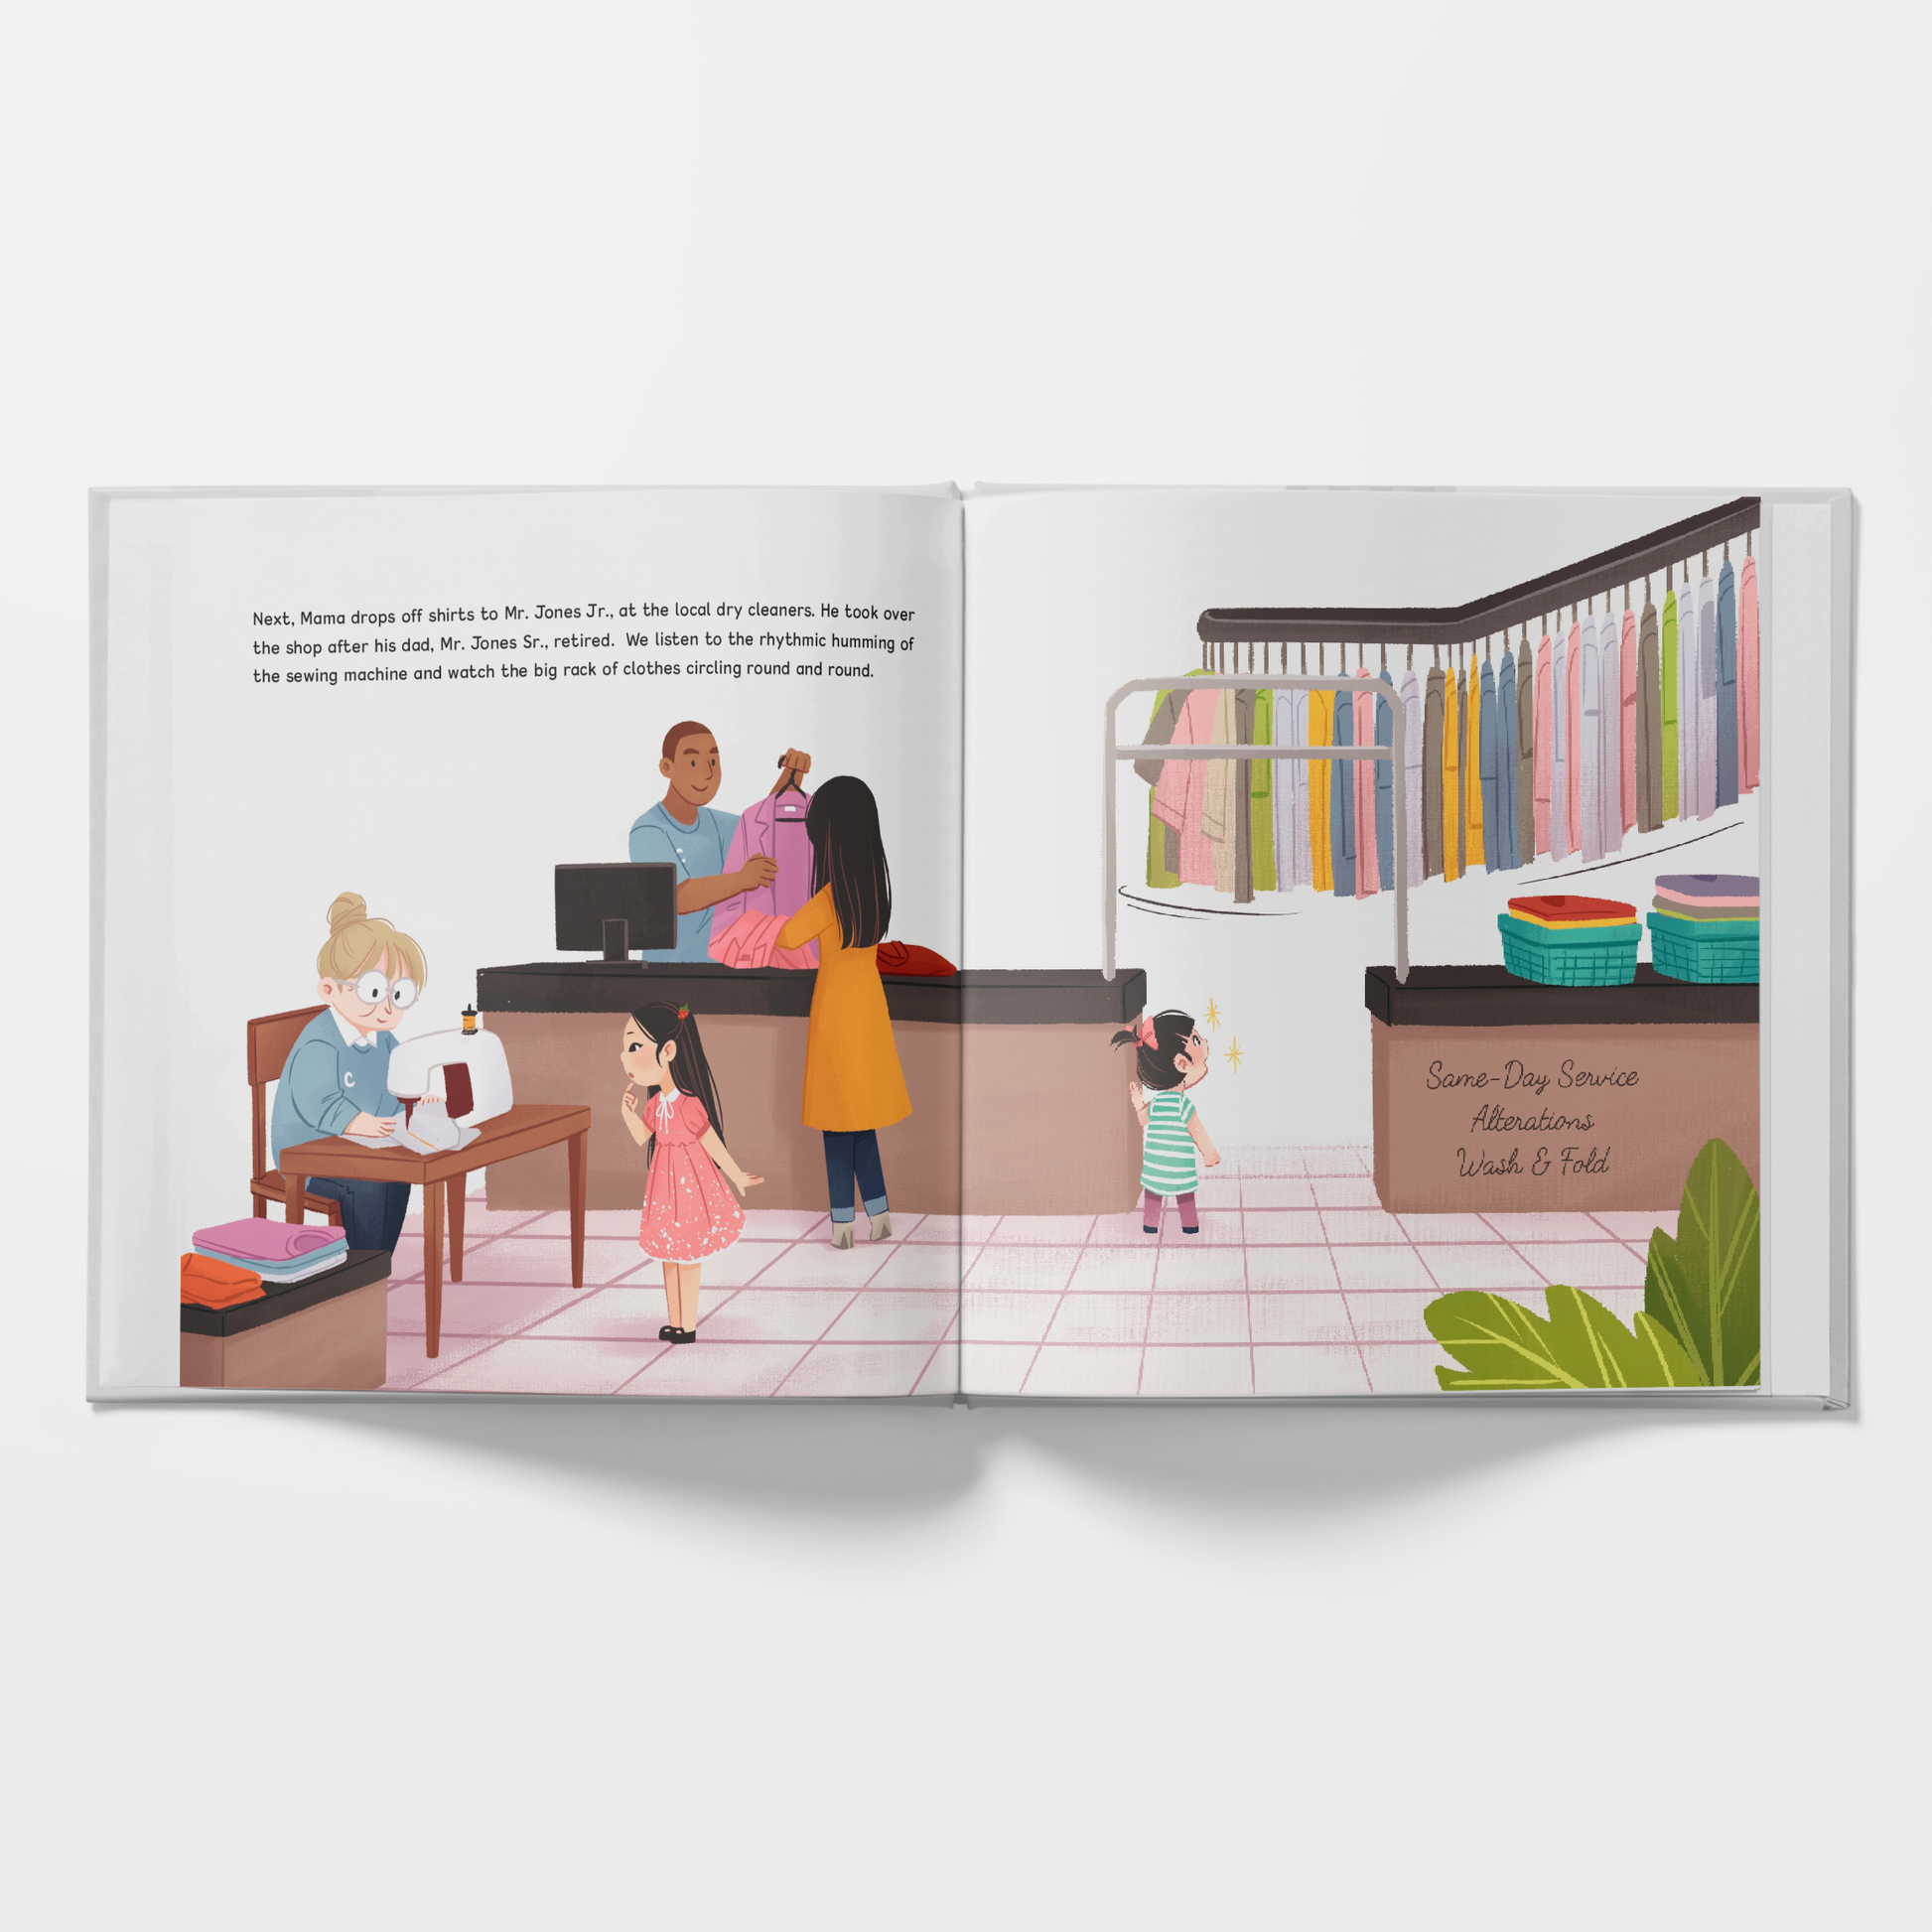 We Shop Small - A Children's Book on Community & Connection